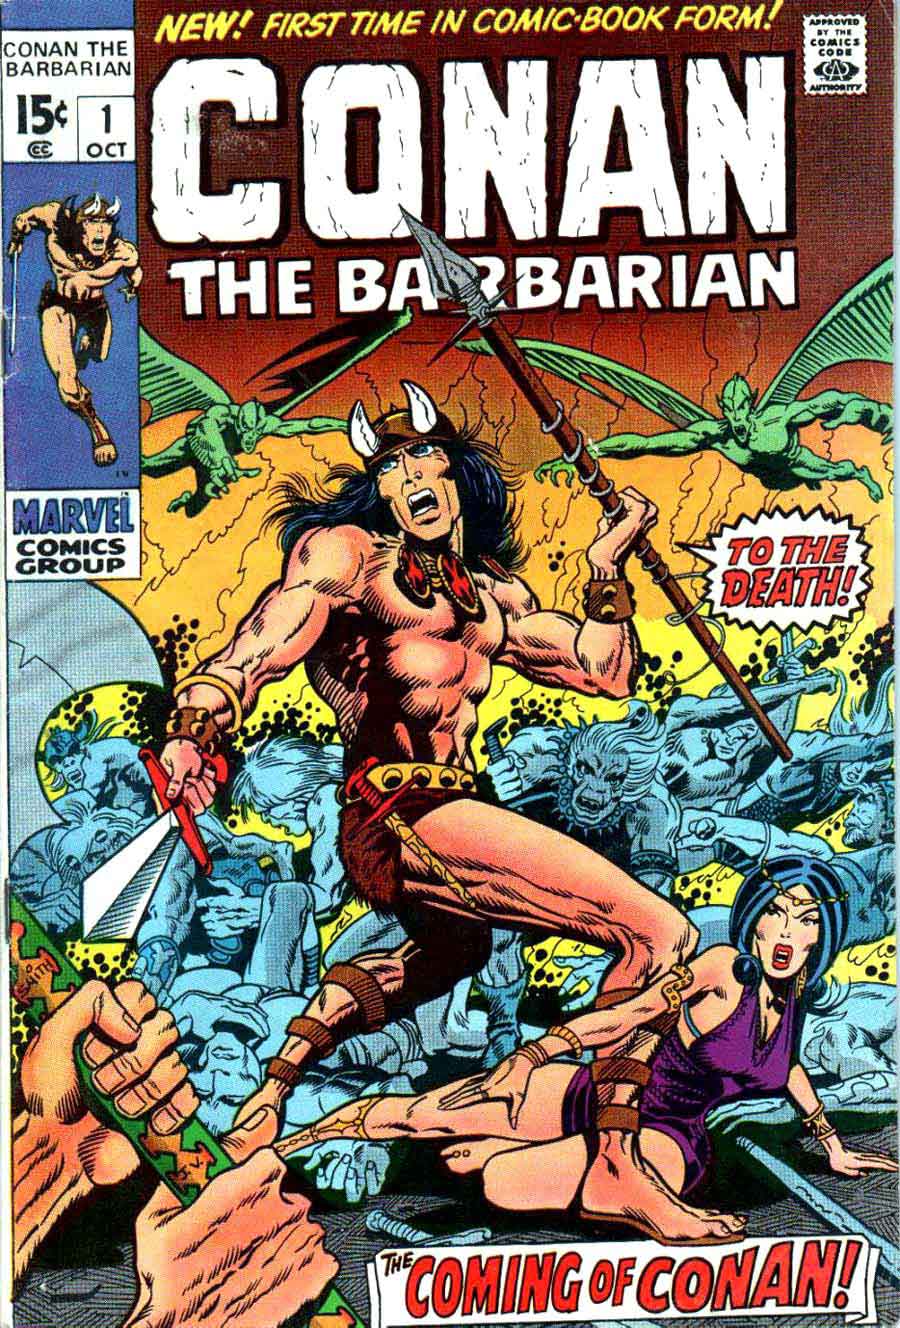 Conan the Barbarian #1 Barry Smith marvel key issue 1970s bronze age comic book cover - 1st appearance